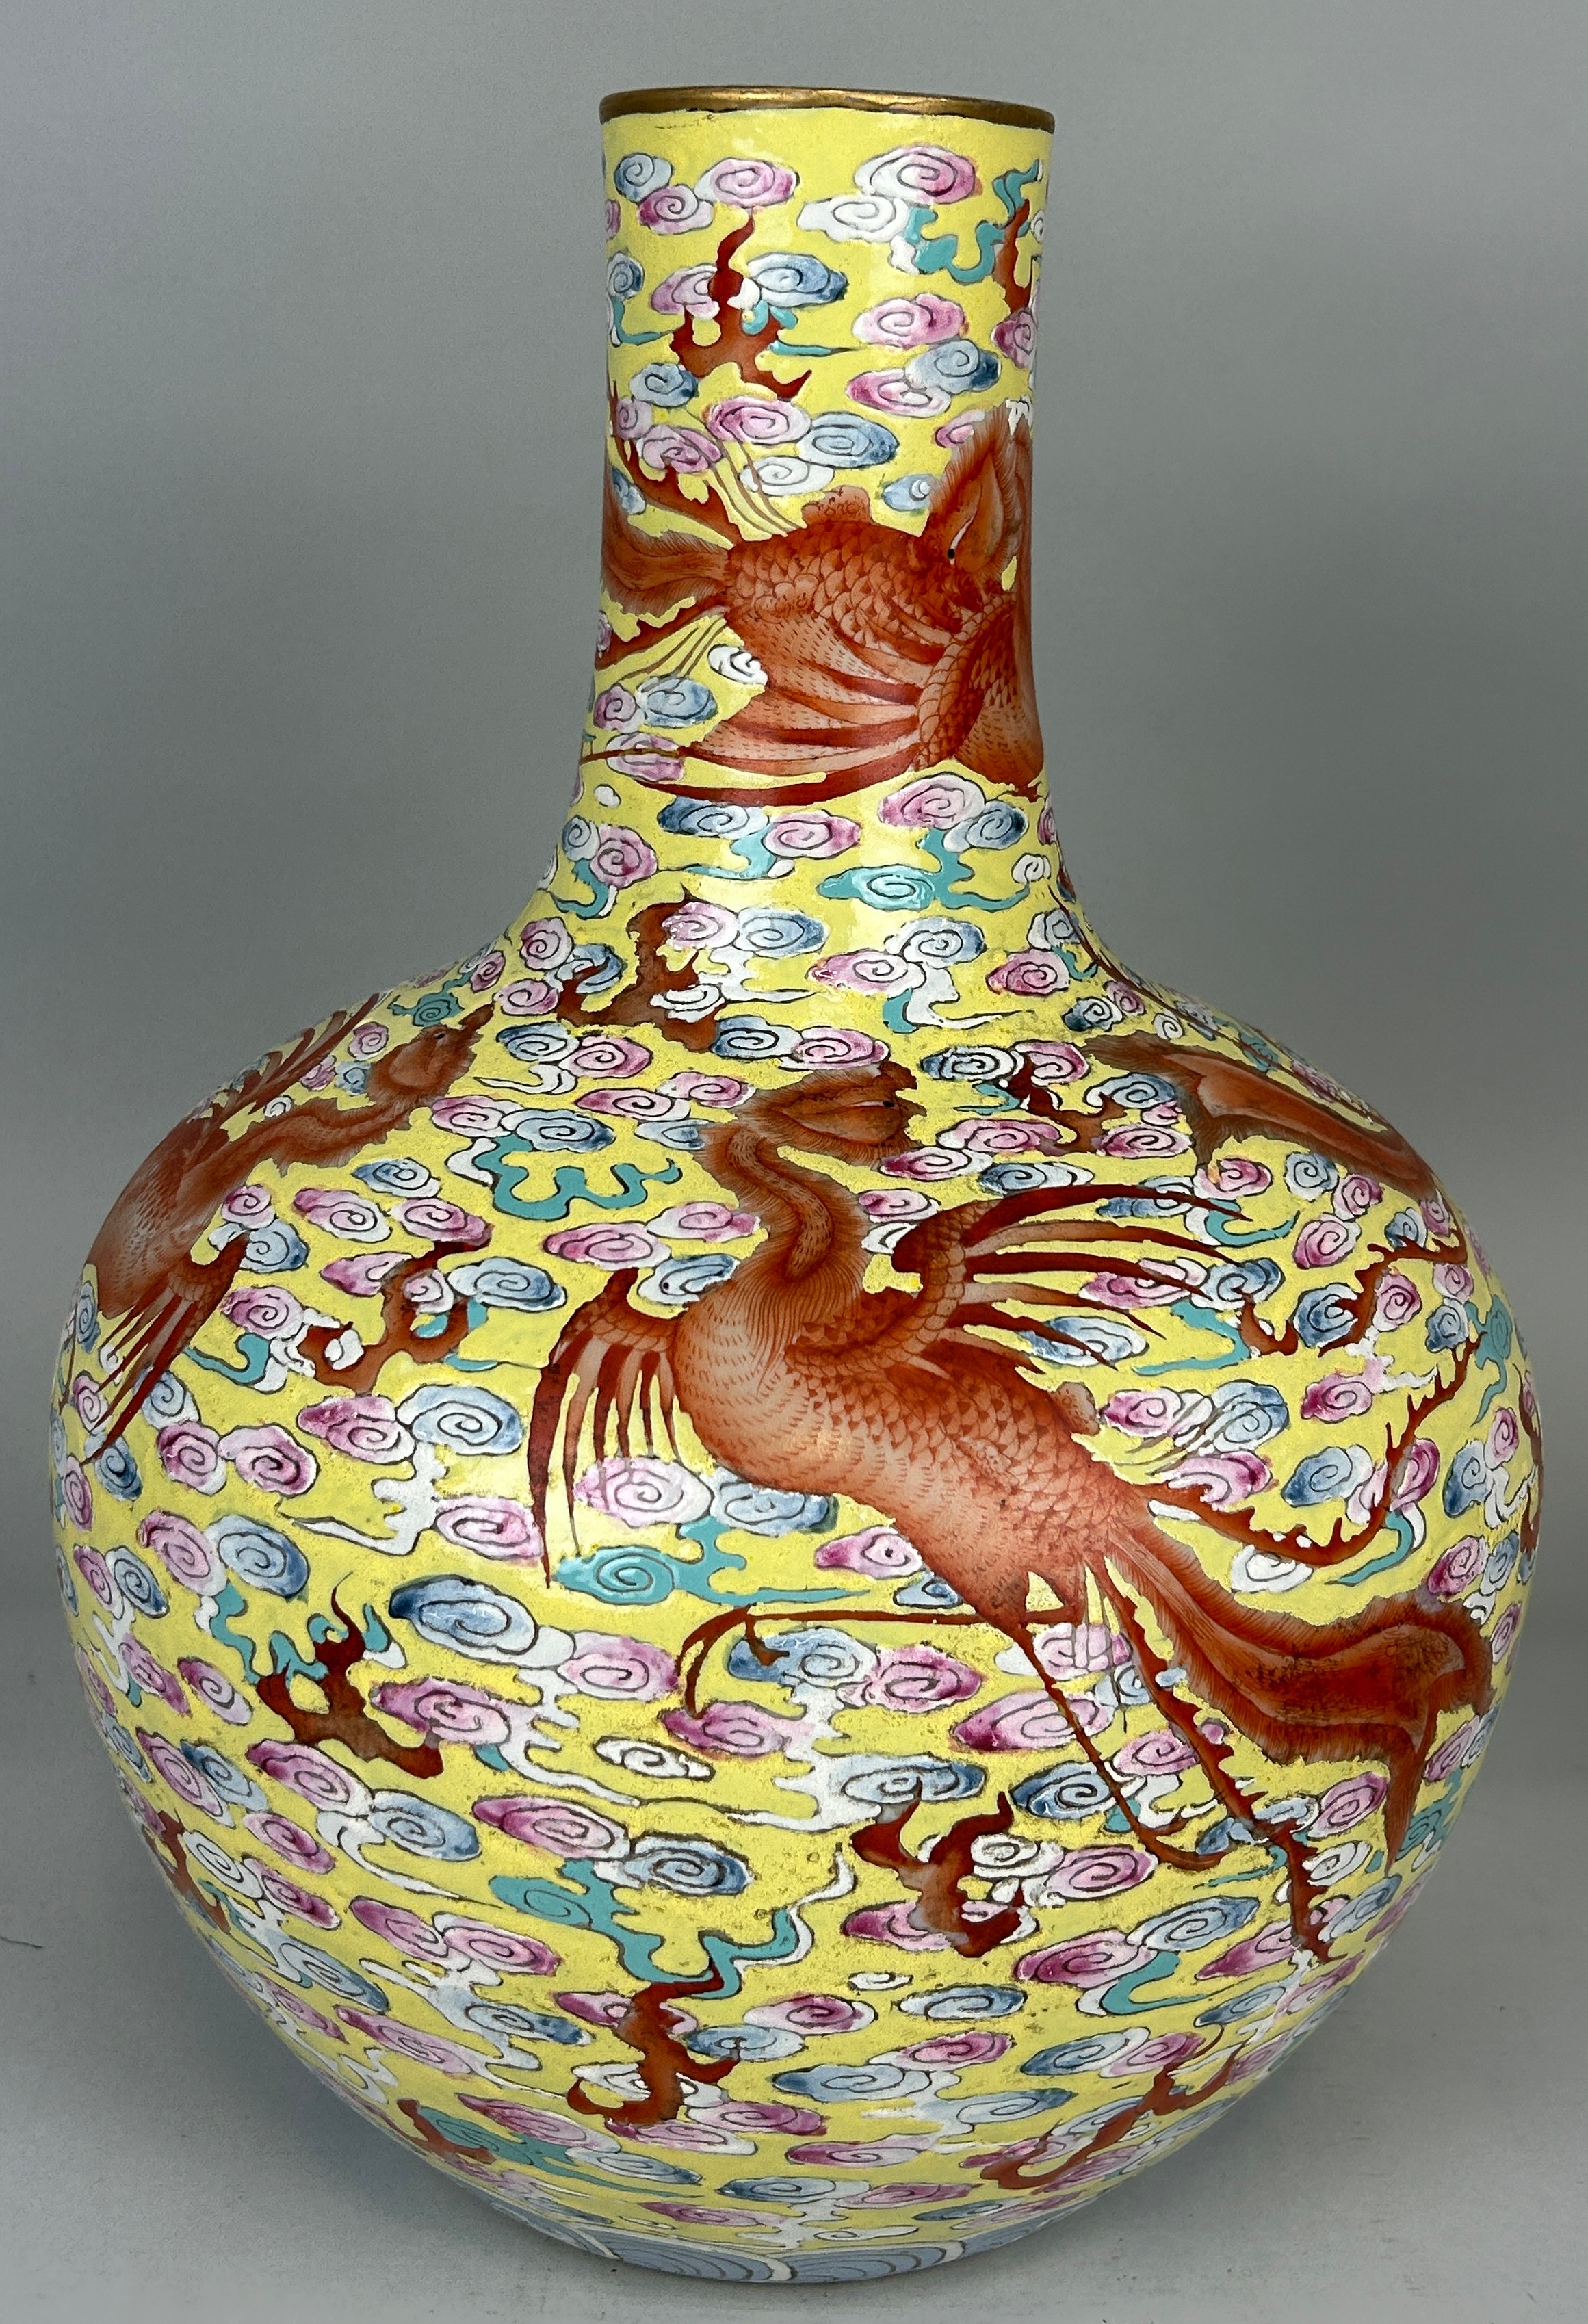 A LARGE CHINESE 'TIANQIUPING' VASE WITH QIANLONG MARK PROBABLY LATE 19TH OR EARLY 20TH CENTURY,